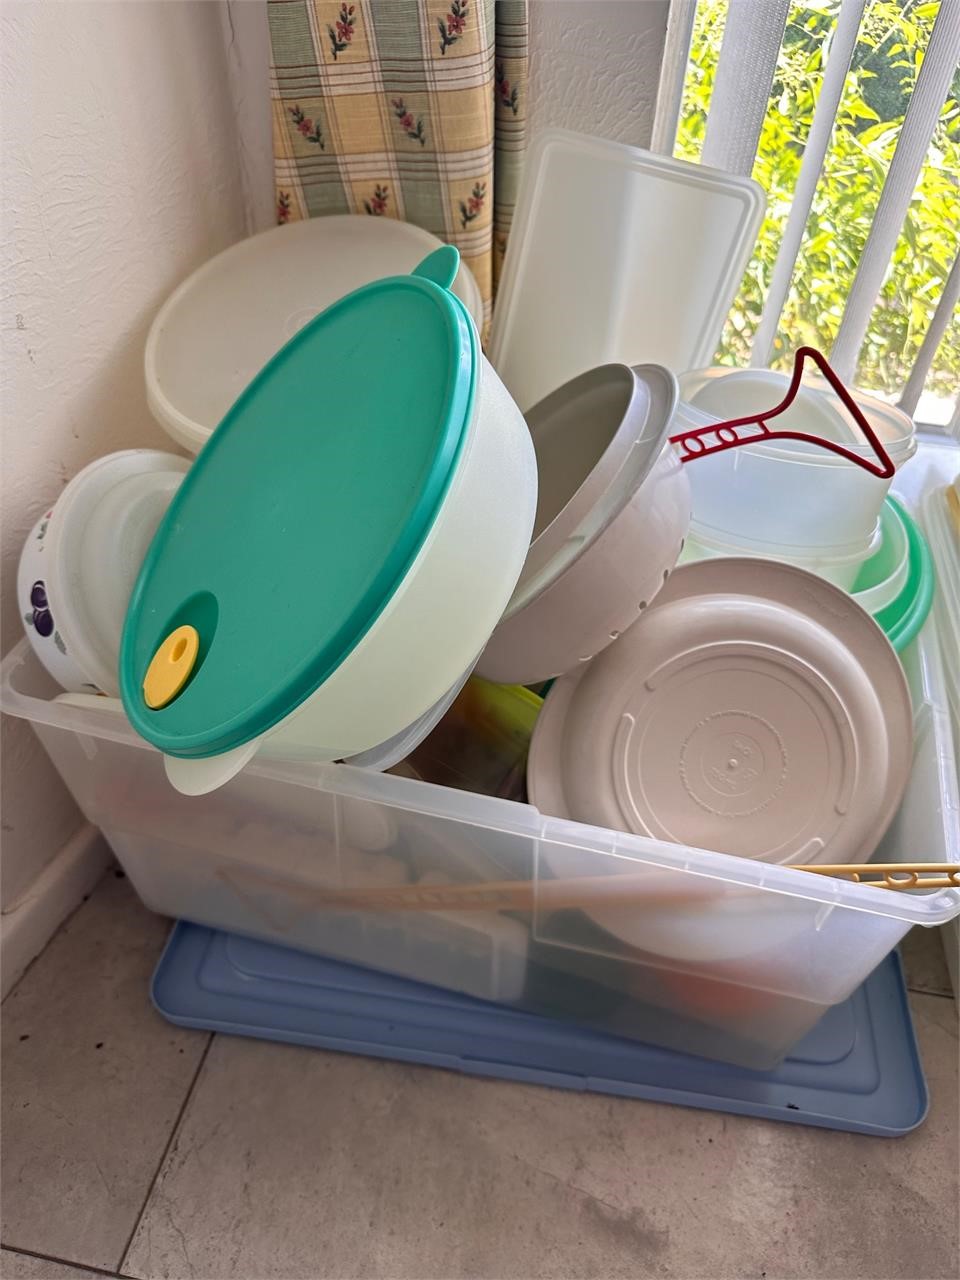 Tub full of Tupperware and other containers